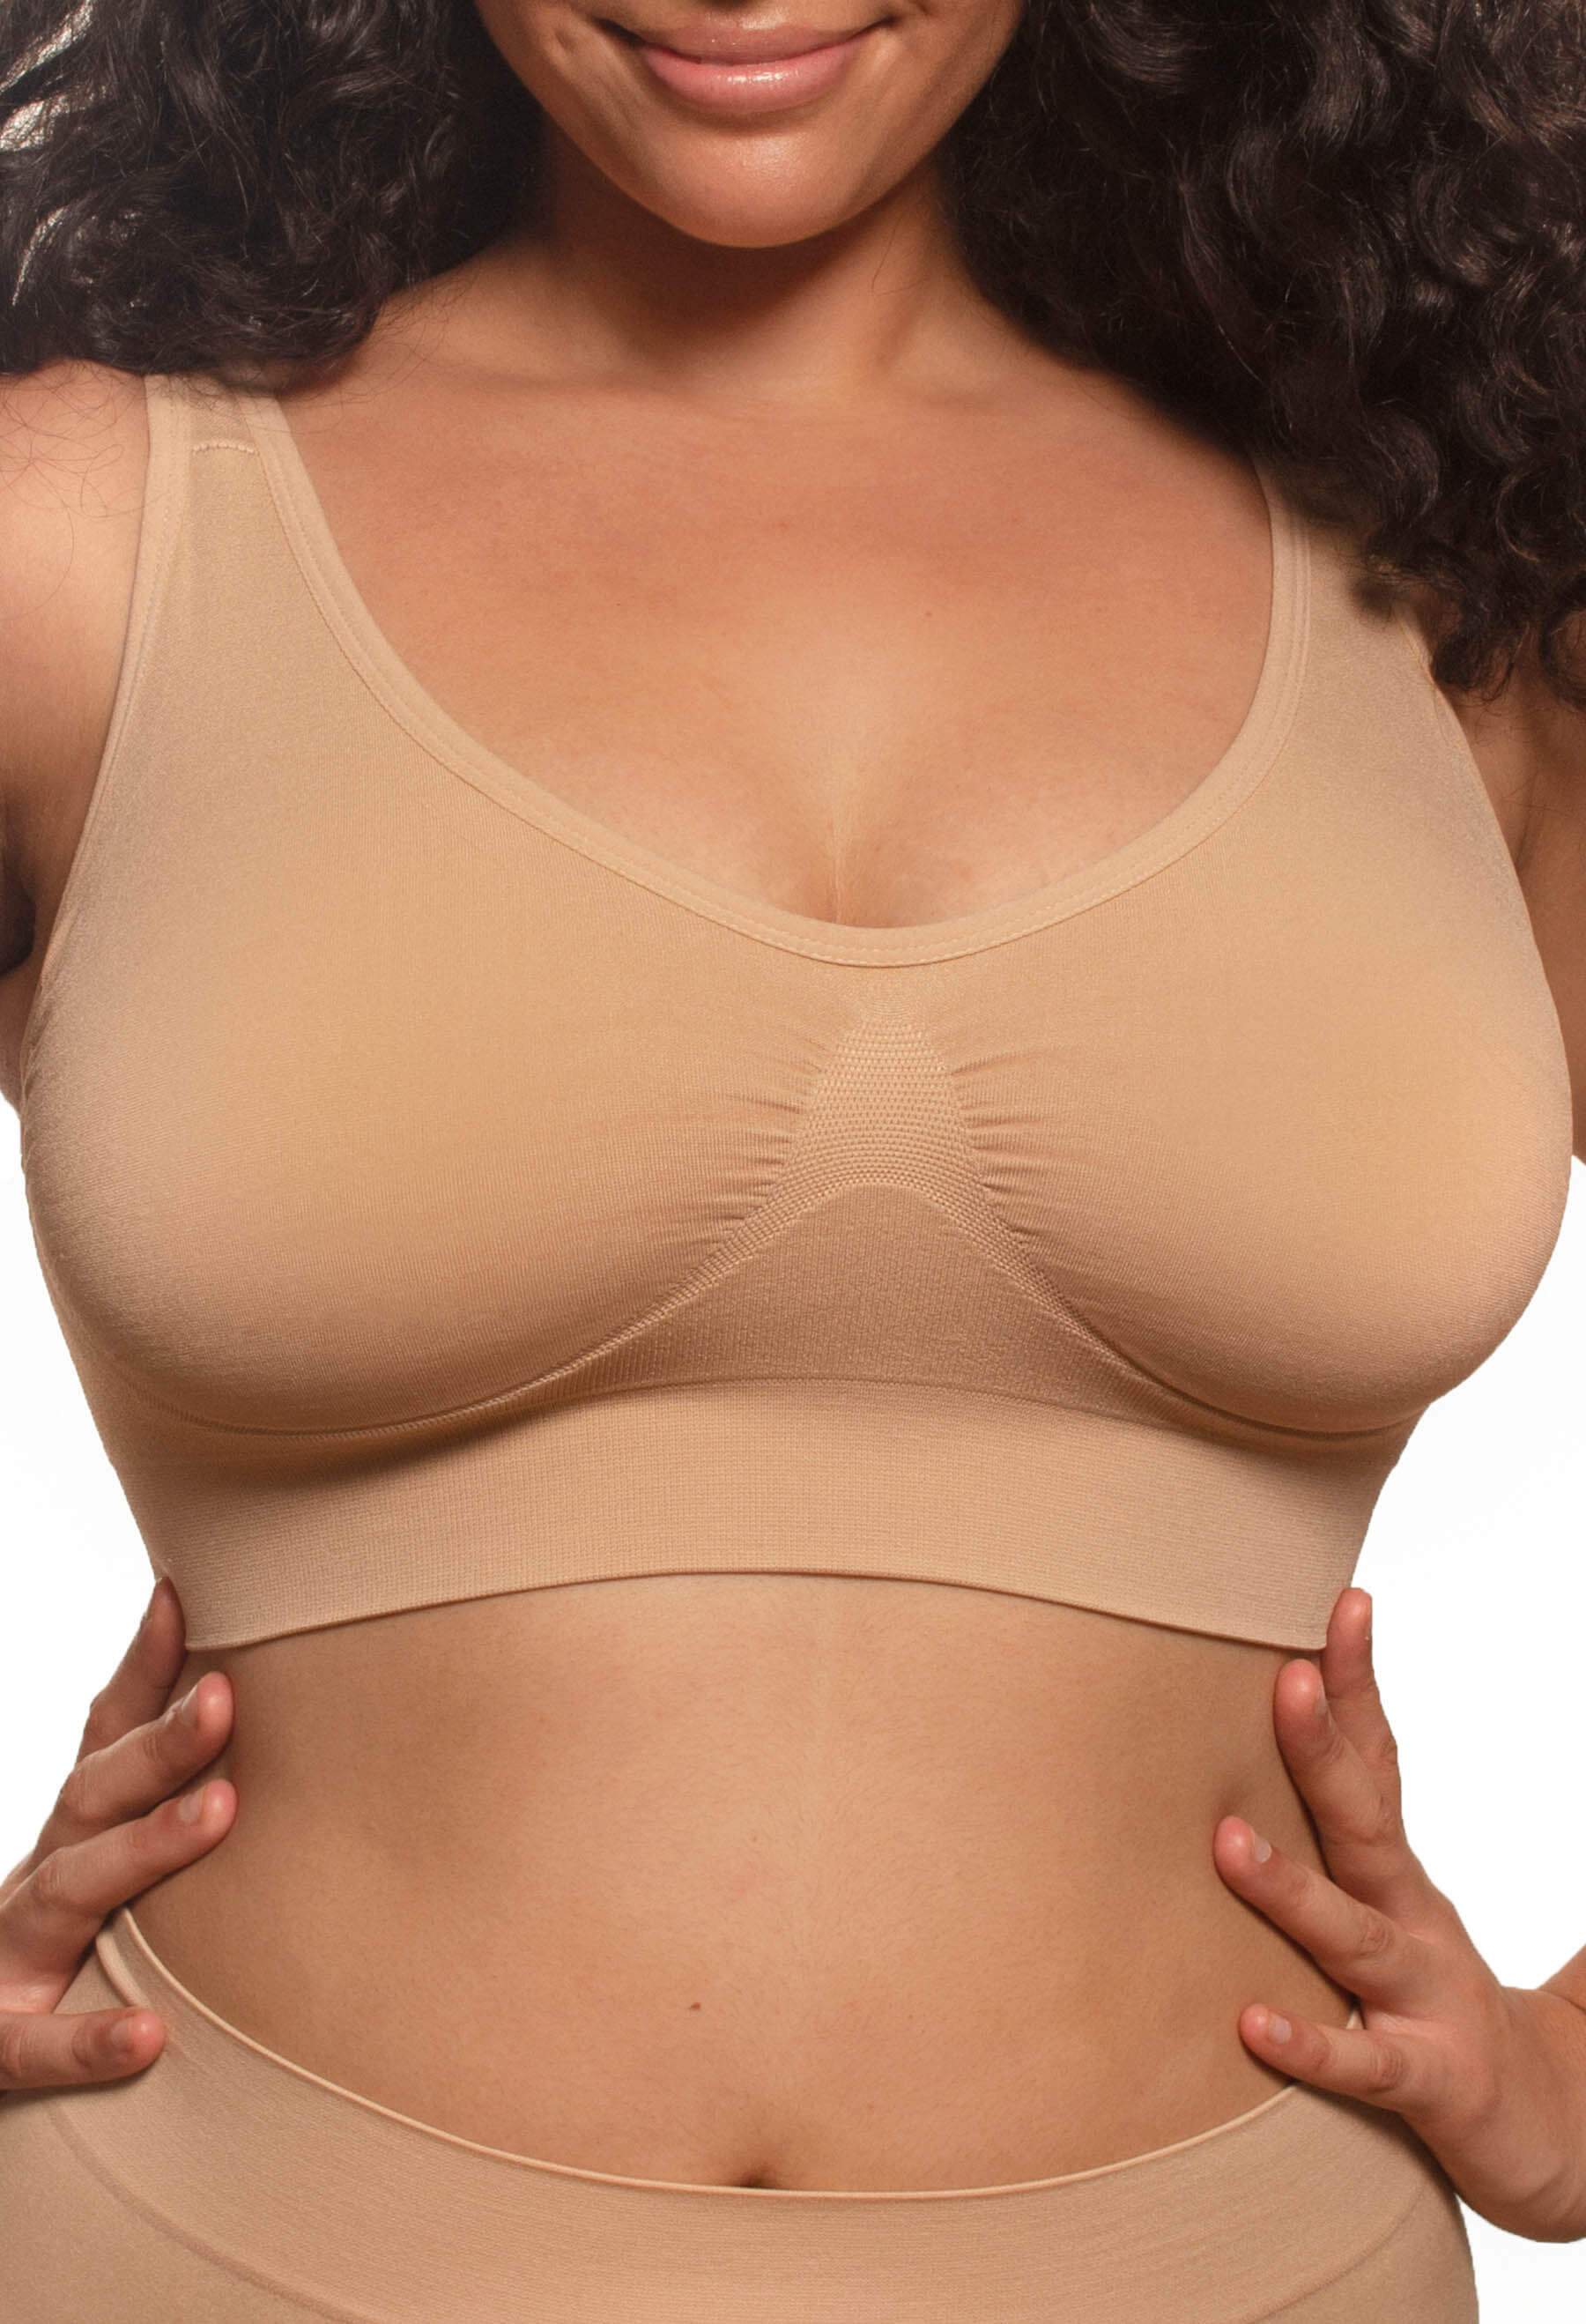 Women's Smooth Tech Comfort Flexi Fit Wirefree Bra 